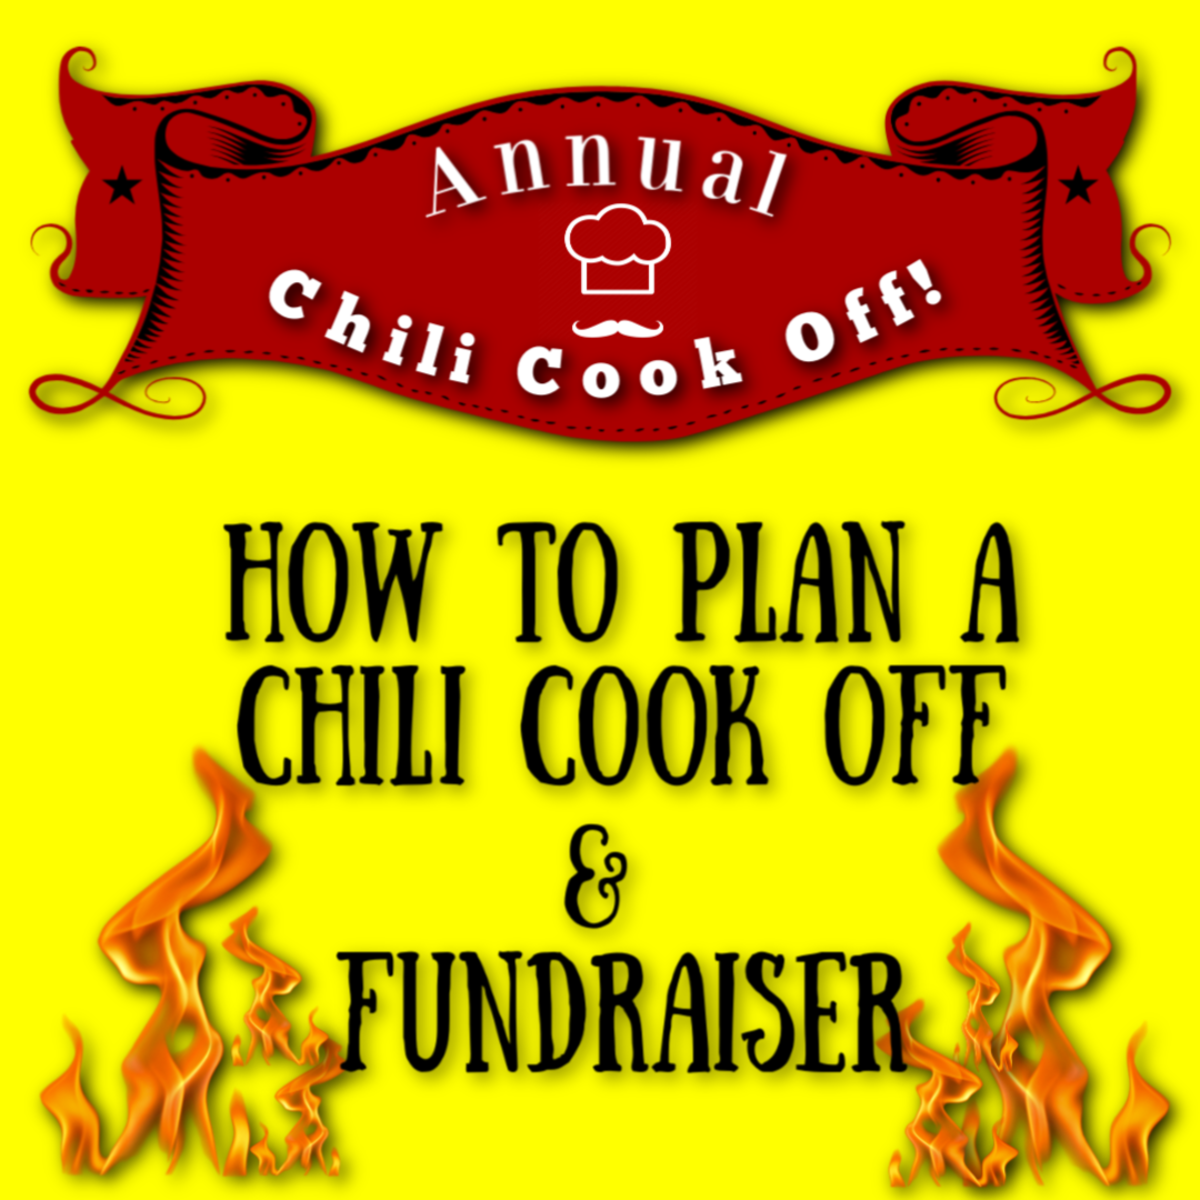 How to Plan and Host a Chili Cook-off Fundraiser